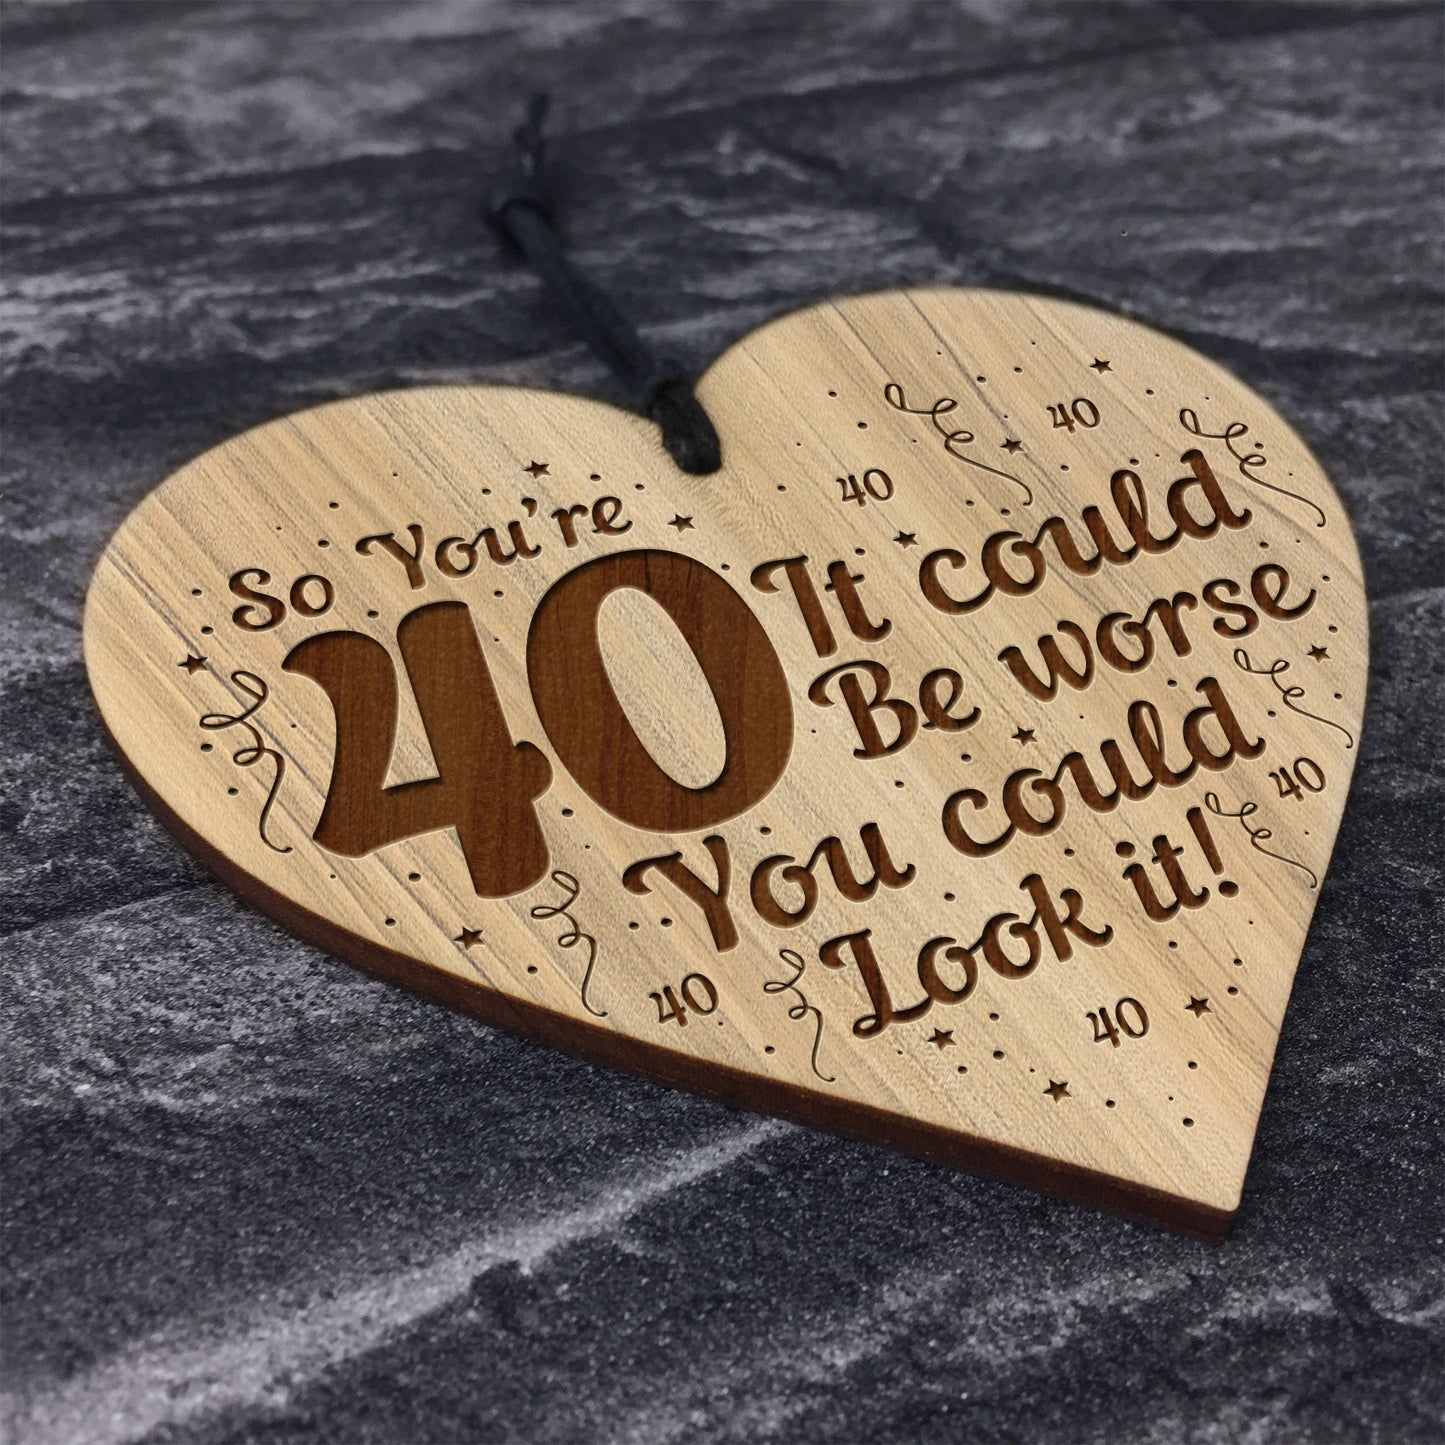 40th Birthday Gift For Friend Engraved Heart Funny Joke 40th